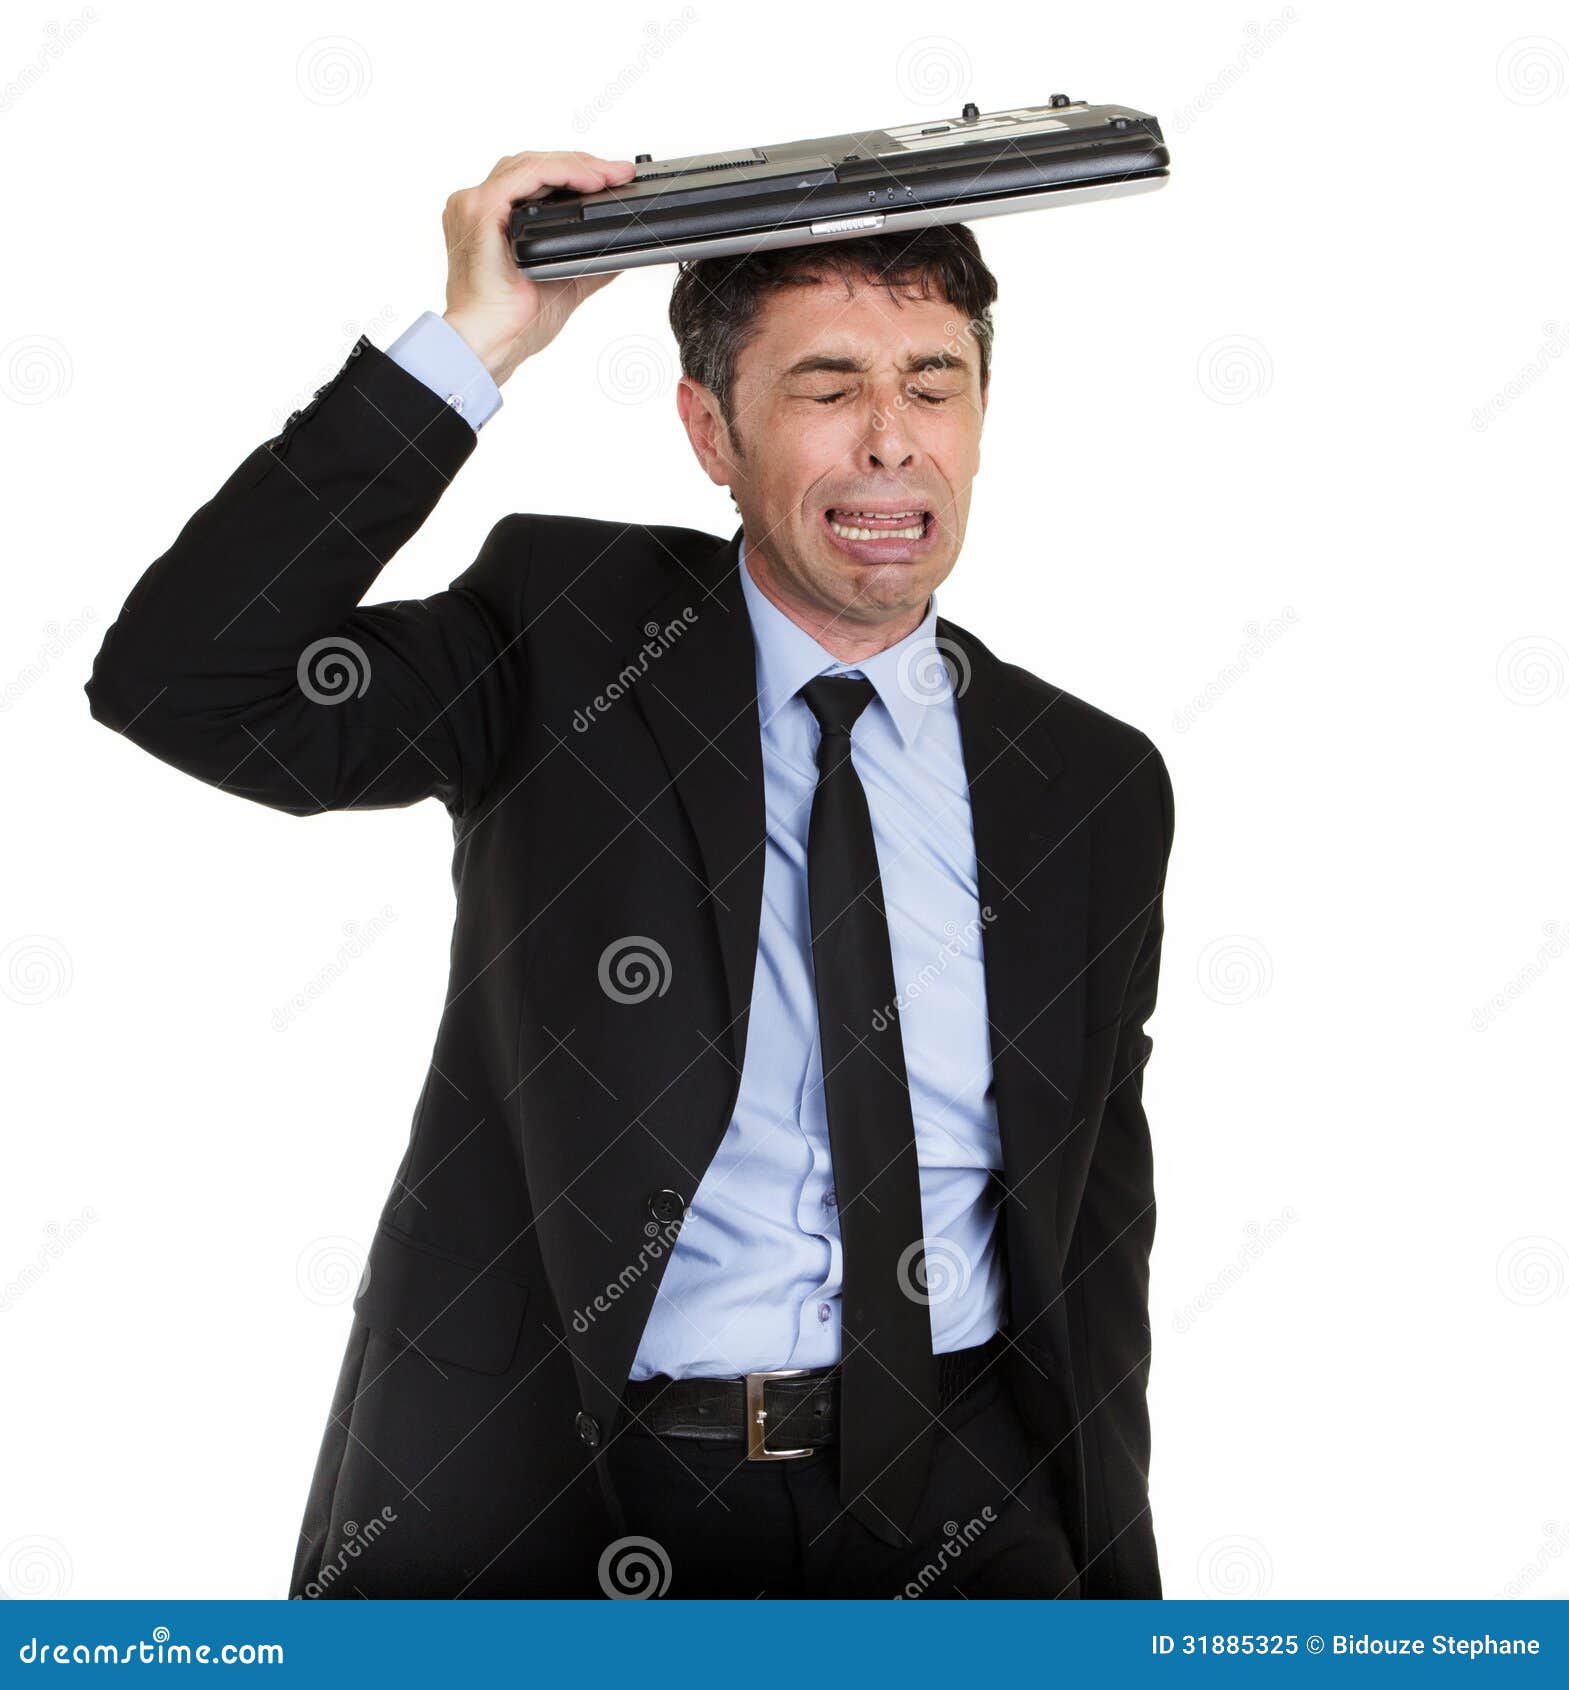 the signs as obscure stockphotos